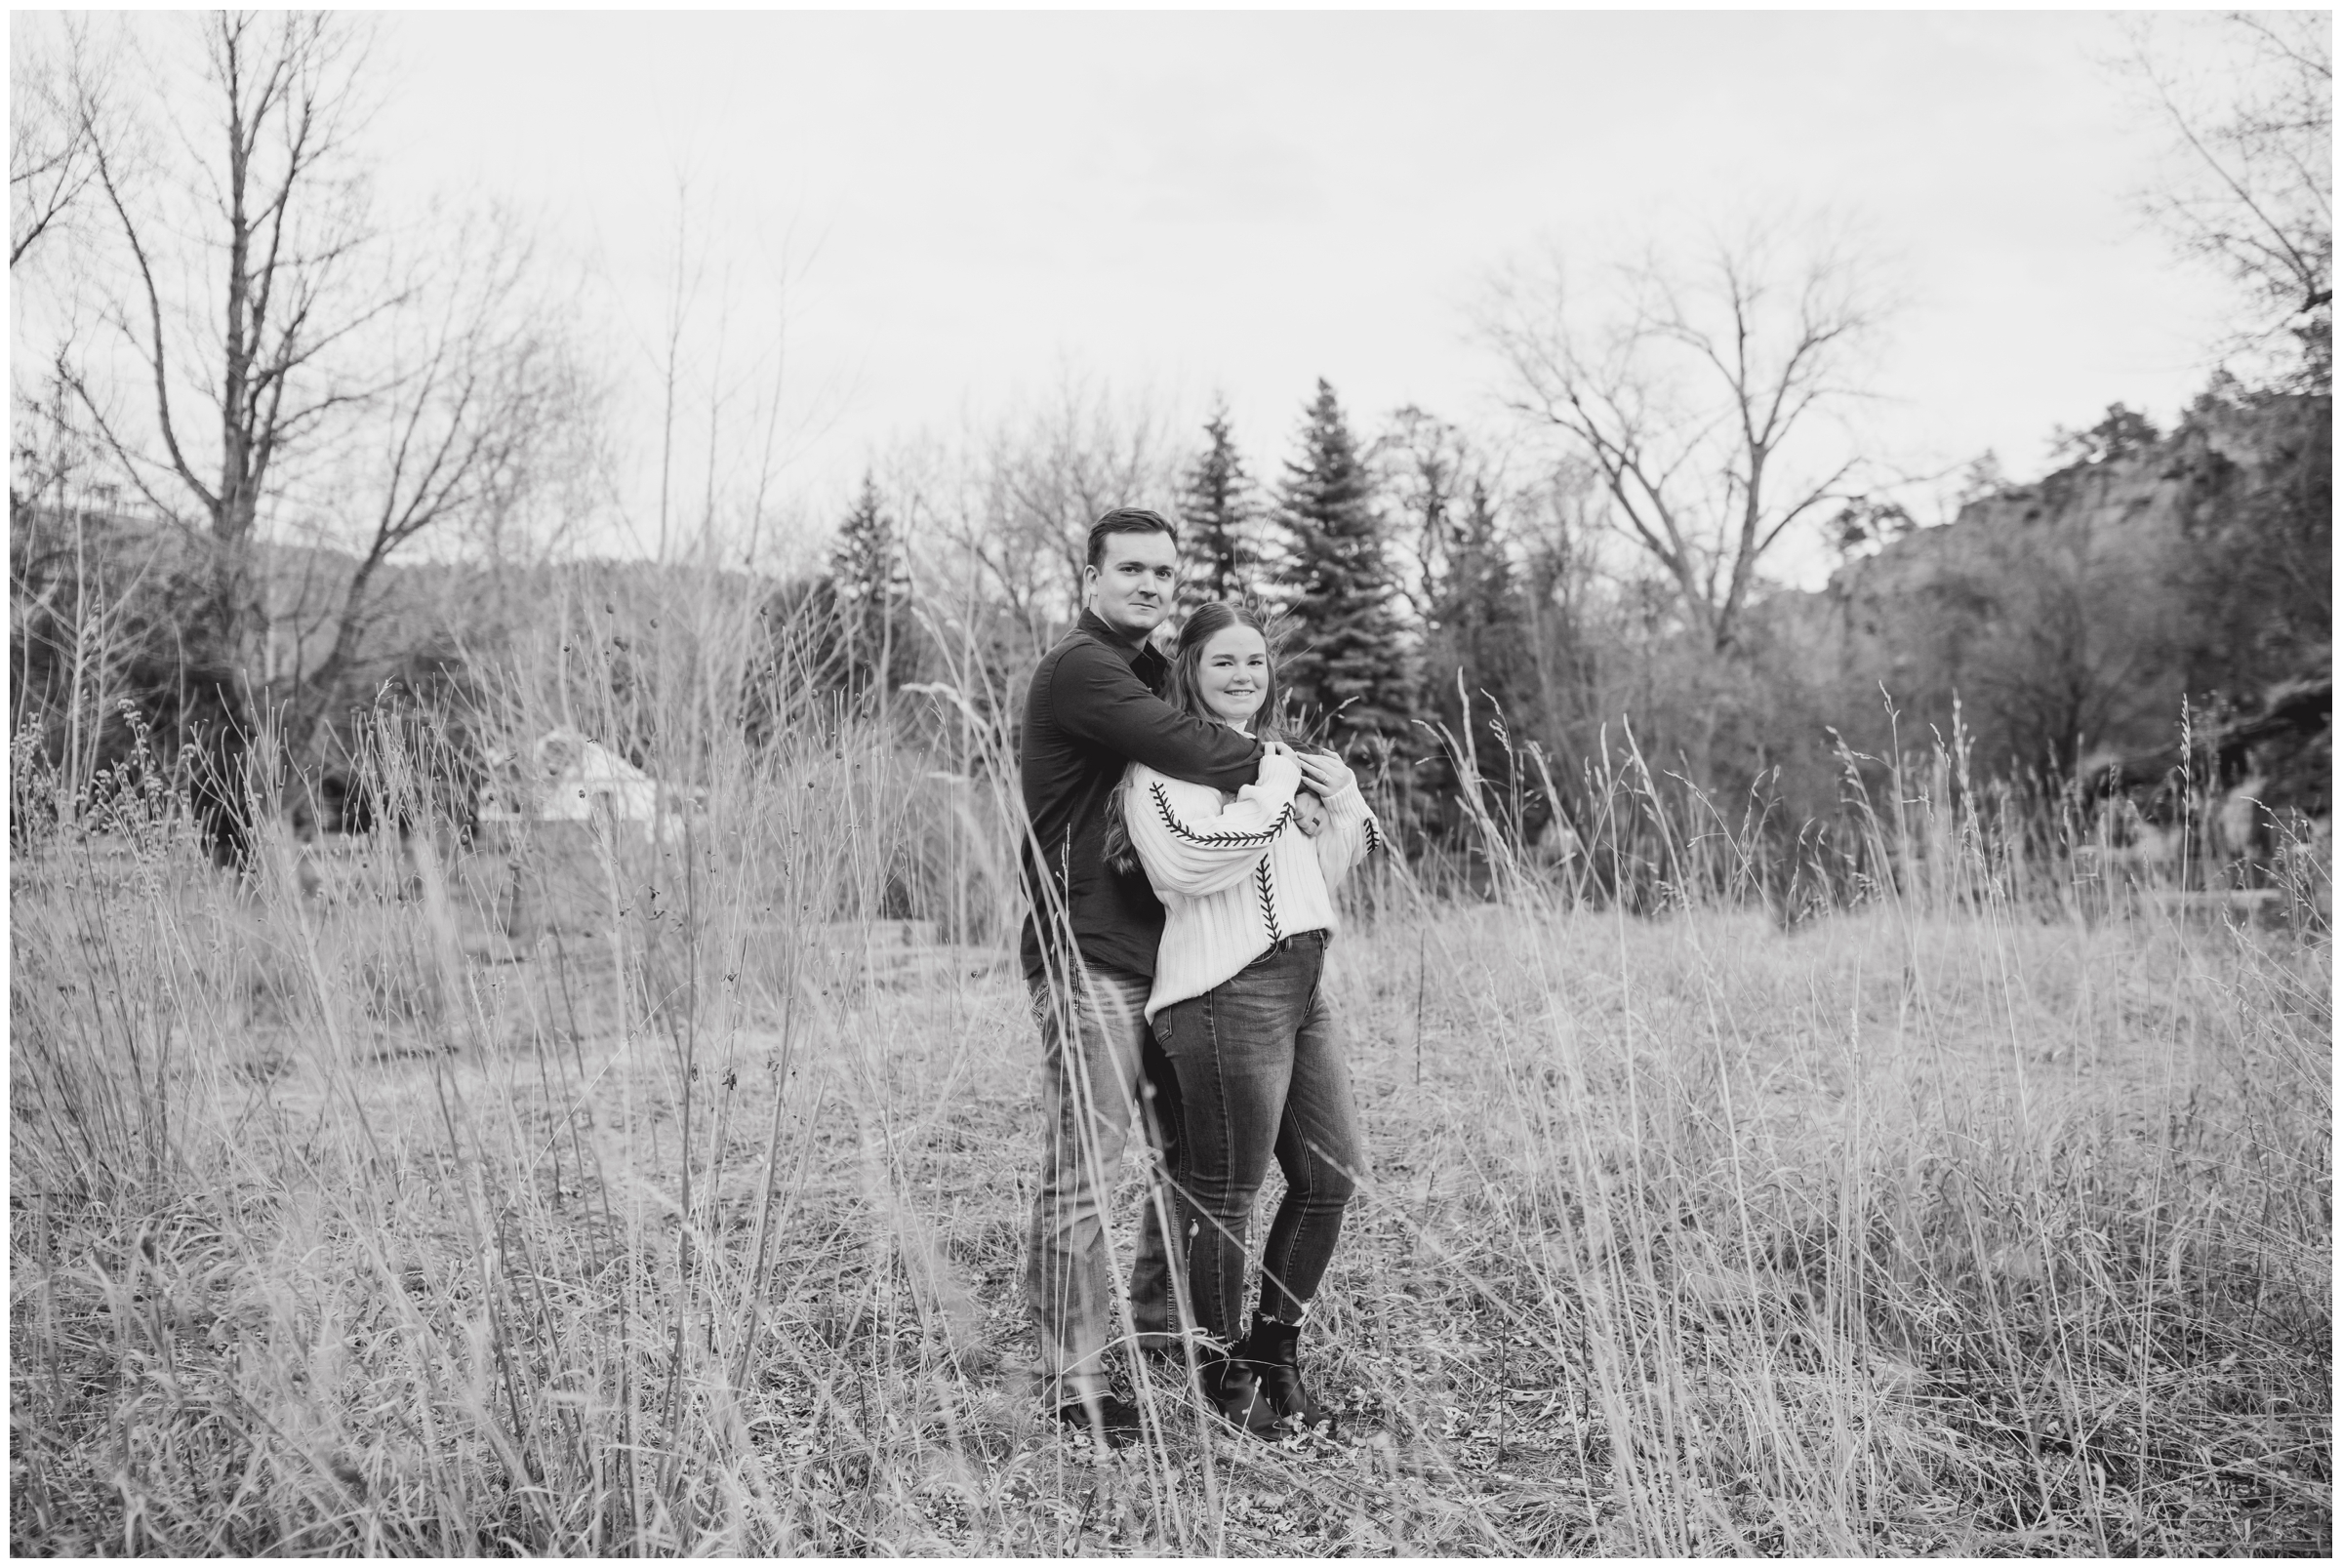 Lyons engagement pictures at Lavern Johnson Park during winter by Colorado wedding photographer Plum Pretty Photography